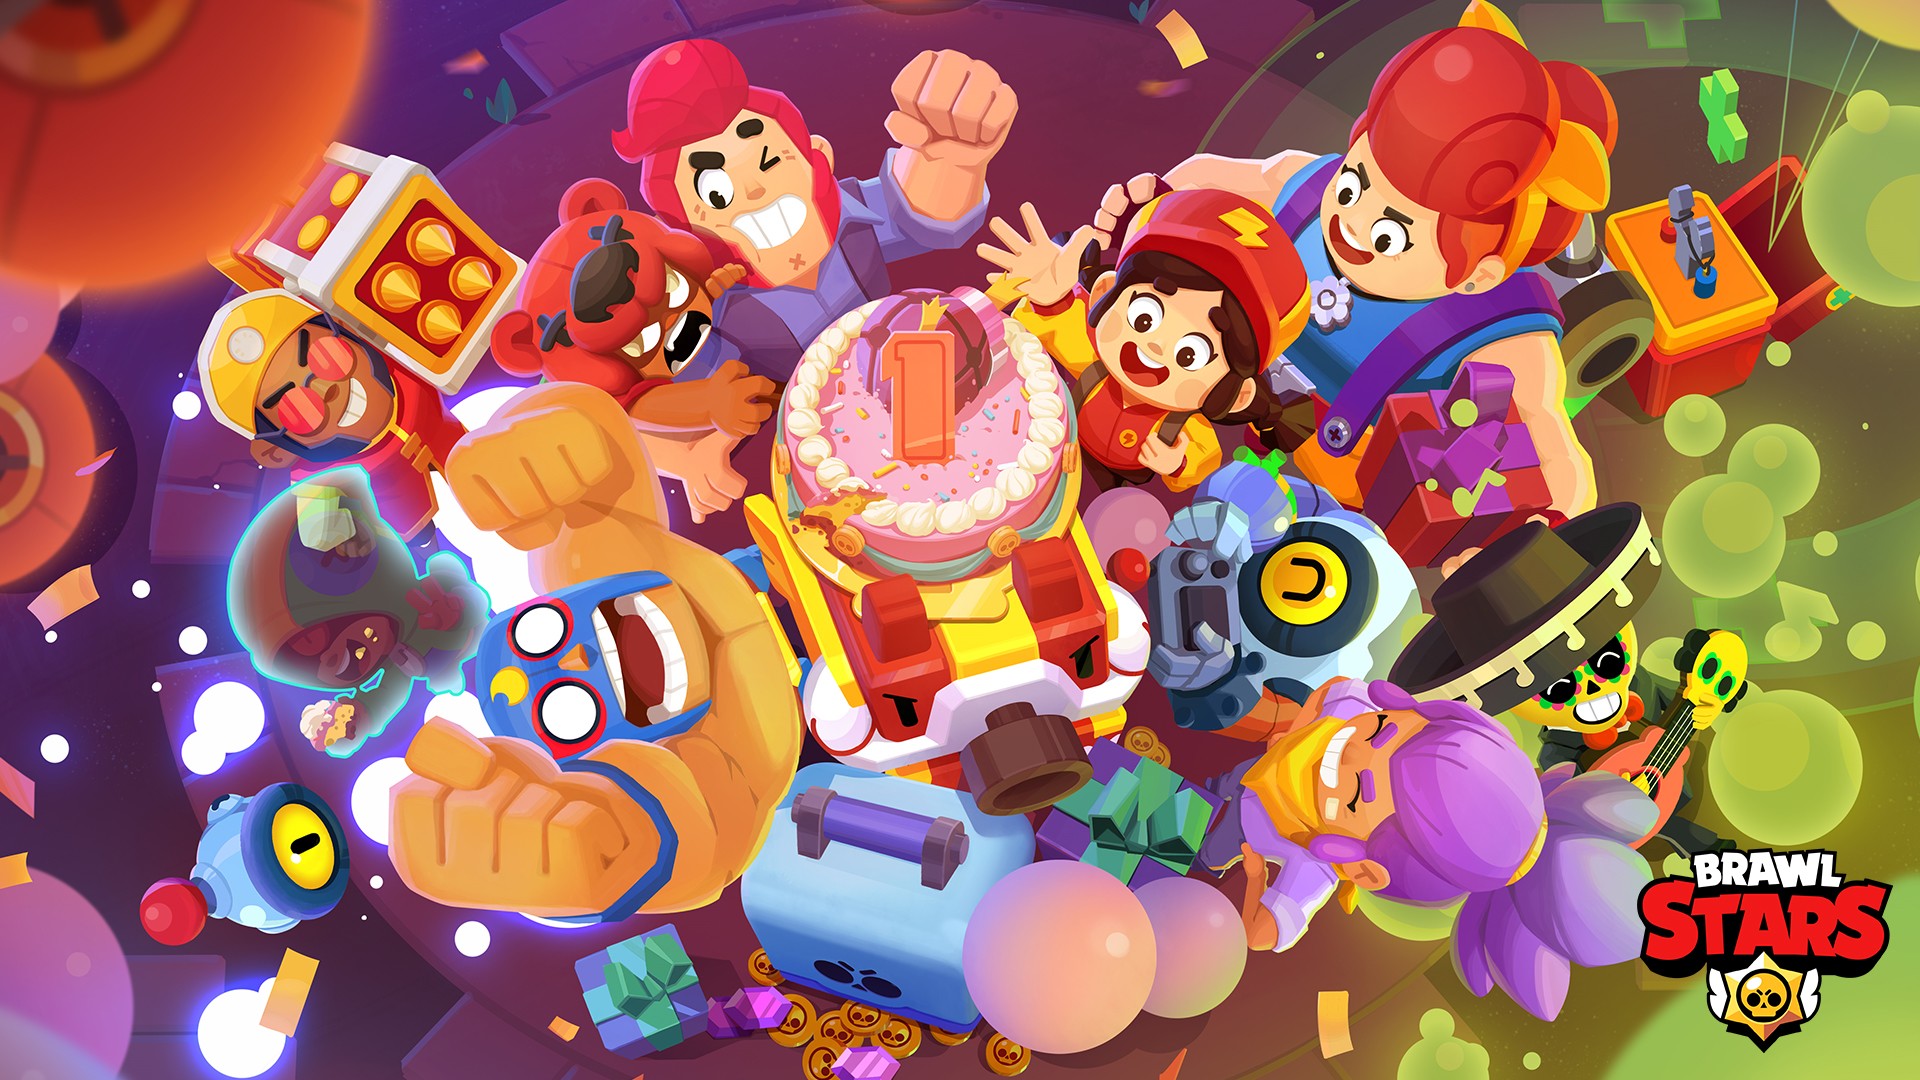 Free Boxes And Skins Up For Grabs In Brawl Stars To Celebrate One Year Anniversary Of China Release Dot Esports - brawl stars supercell release date